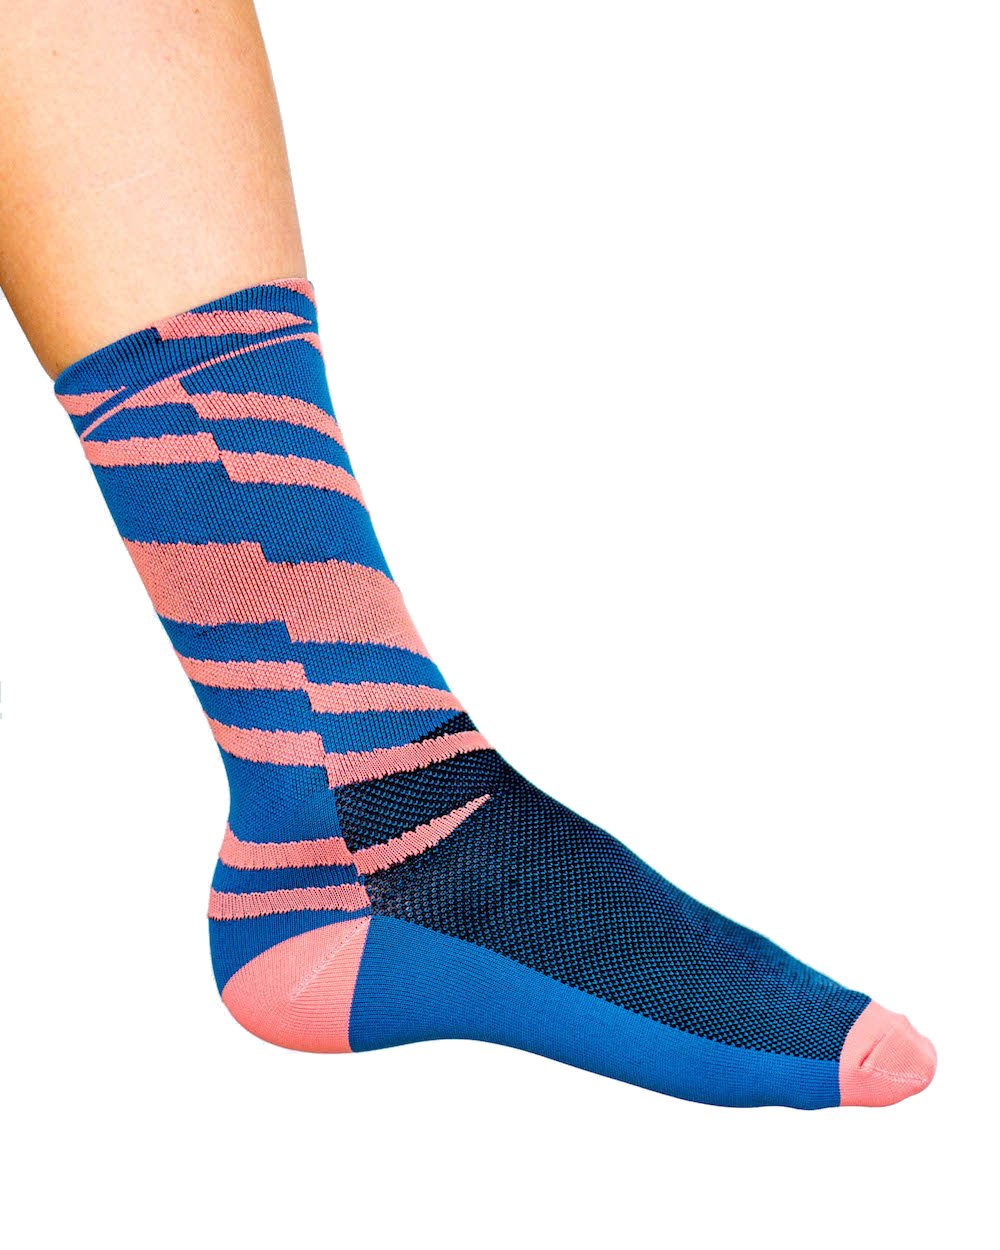 Faded look, Pink and blue stripe cycling socks.